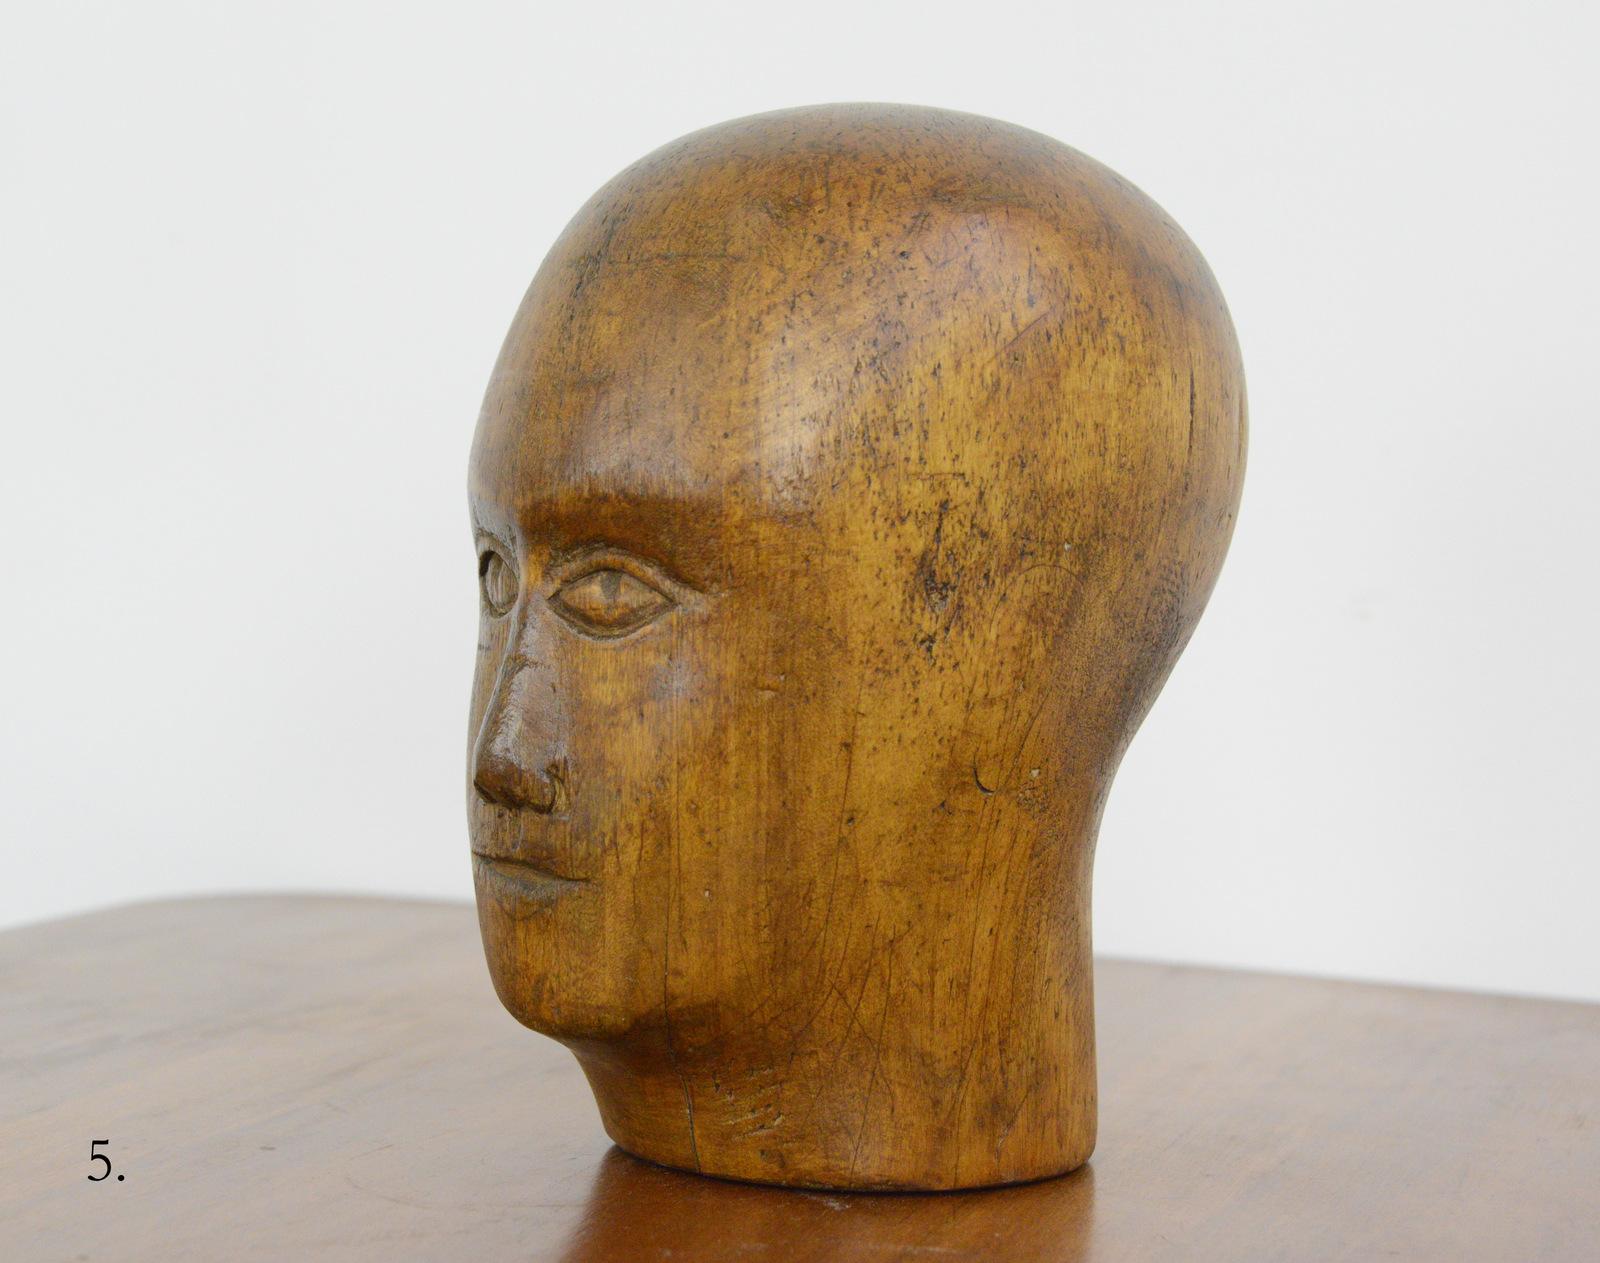 German carved wooden milliners head, circa 1920

- Hand carved from sycamore
- Used in the displaying and making of hats
- German ~ 1920
- Measures: 25cm tall x 15cm wide x 18cm deep

Condition report

Signs of its previous in the form of